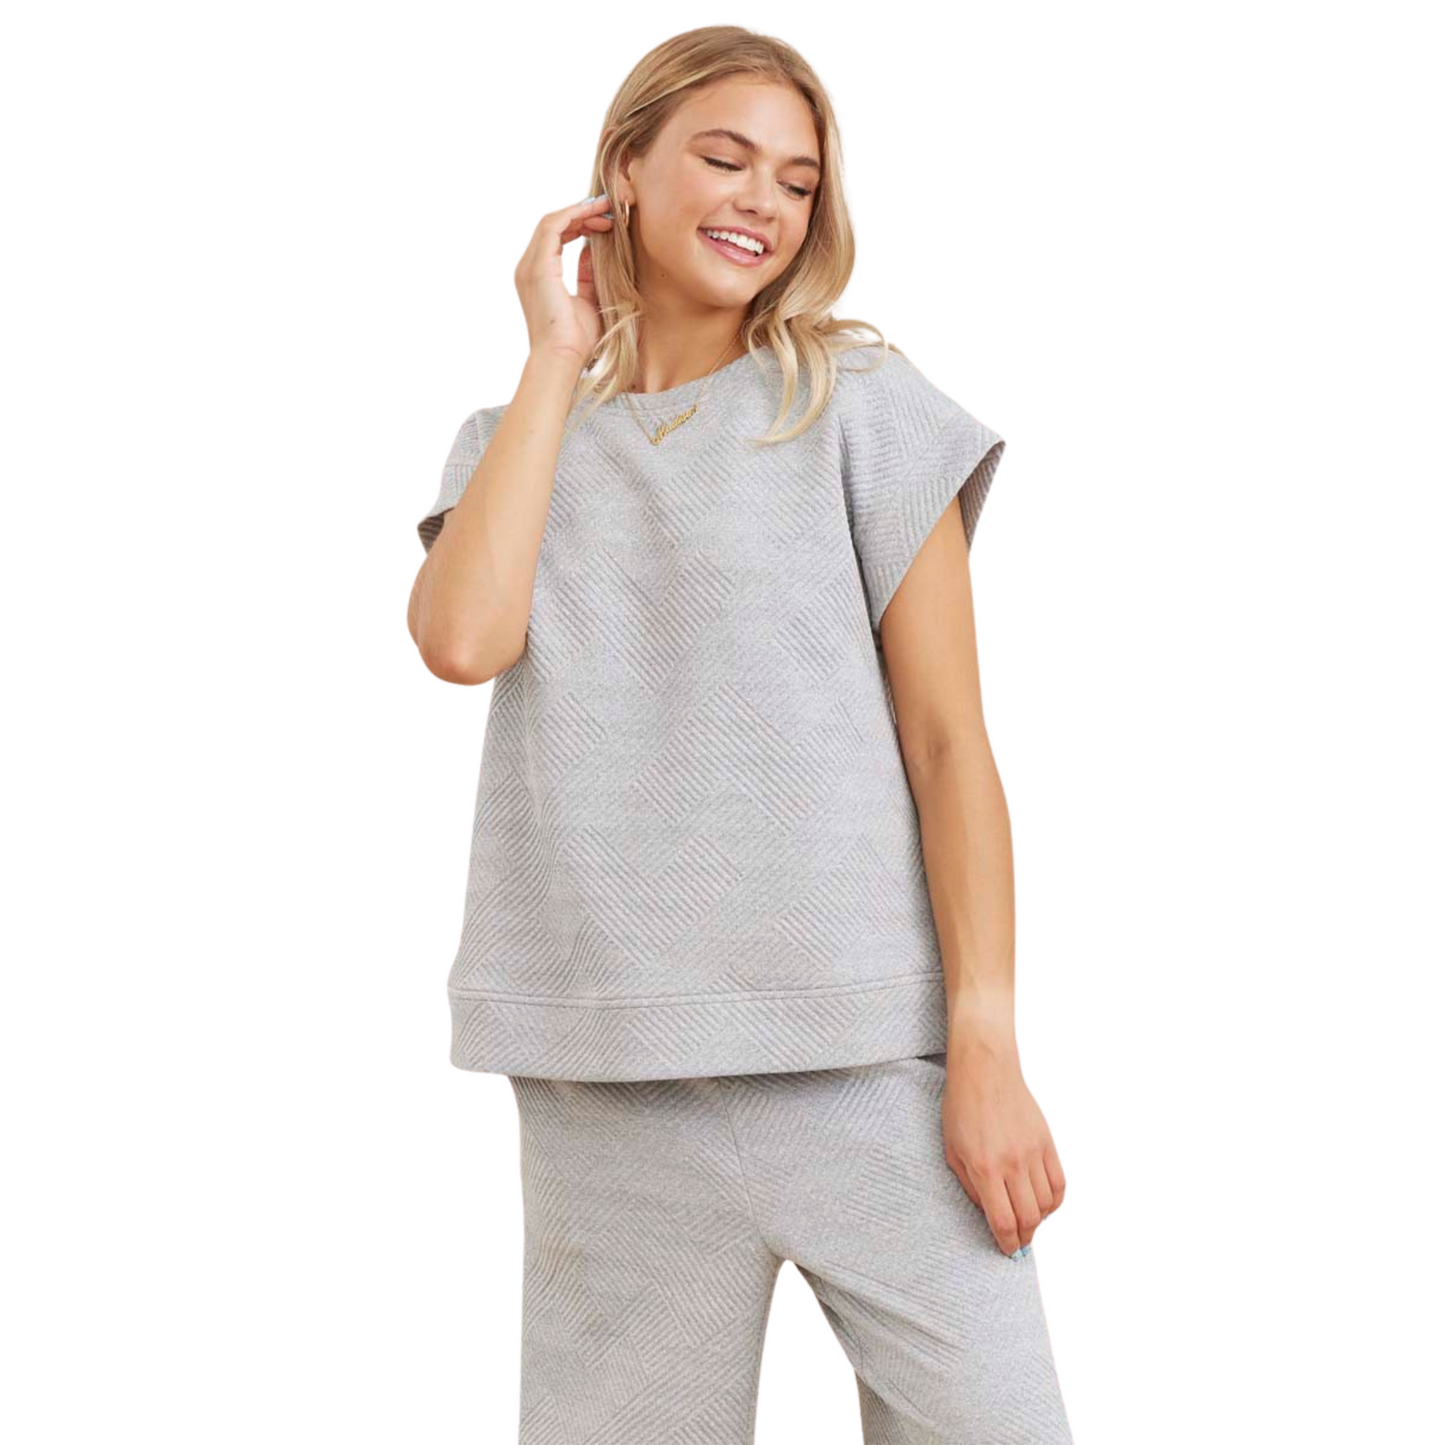 This heather grey top and bottom set features a textured U-neck top with short kimono sleeves and band hems. Made of lightweight, non-sheer fabric, this set offers comfort and style. Perfect for any occasion, a must-have for any wardrobe. Model is 5'8'' and is wearing a Small.